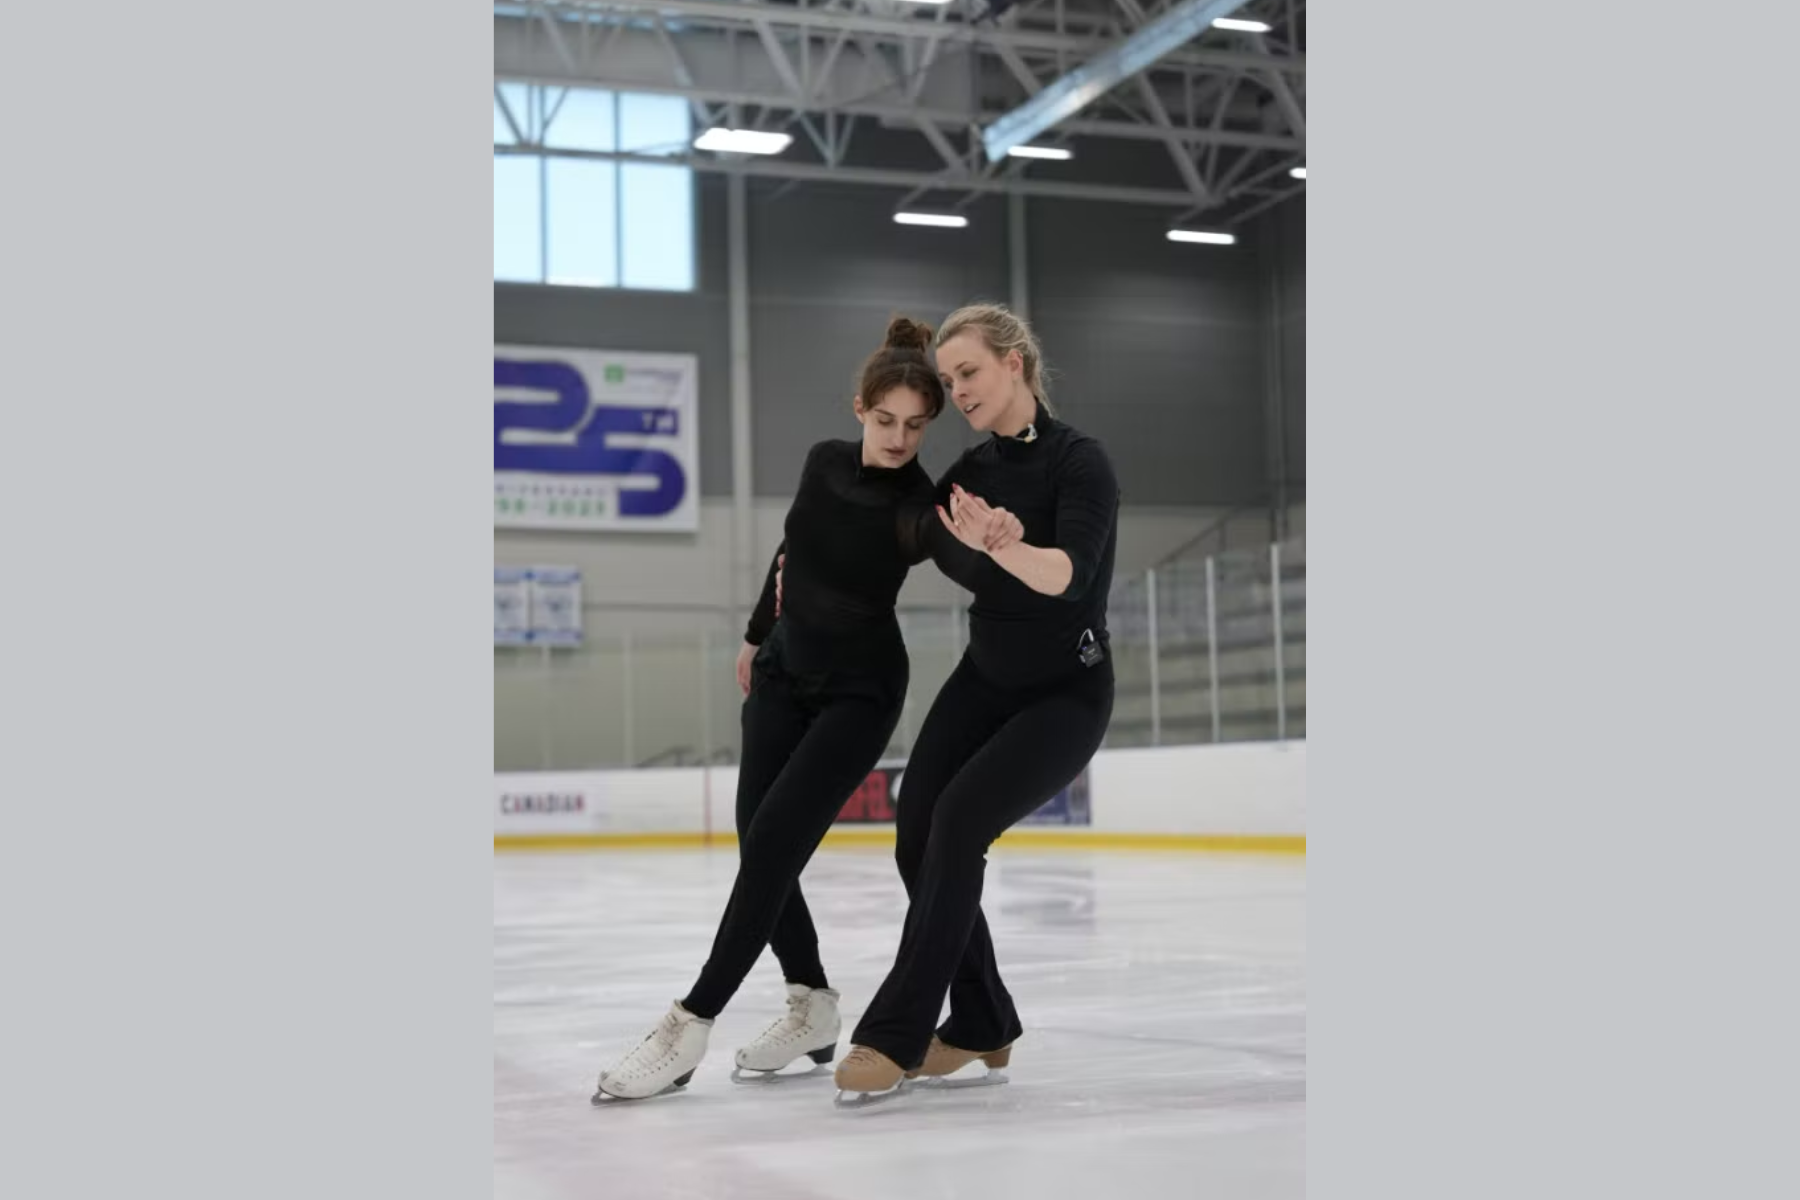 Two women are skating together